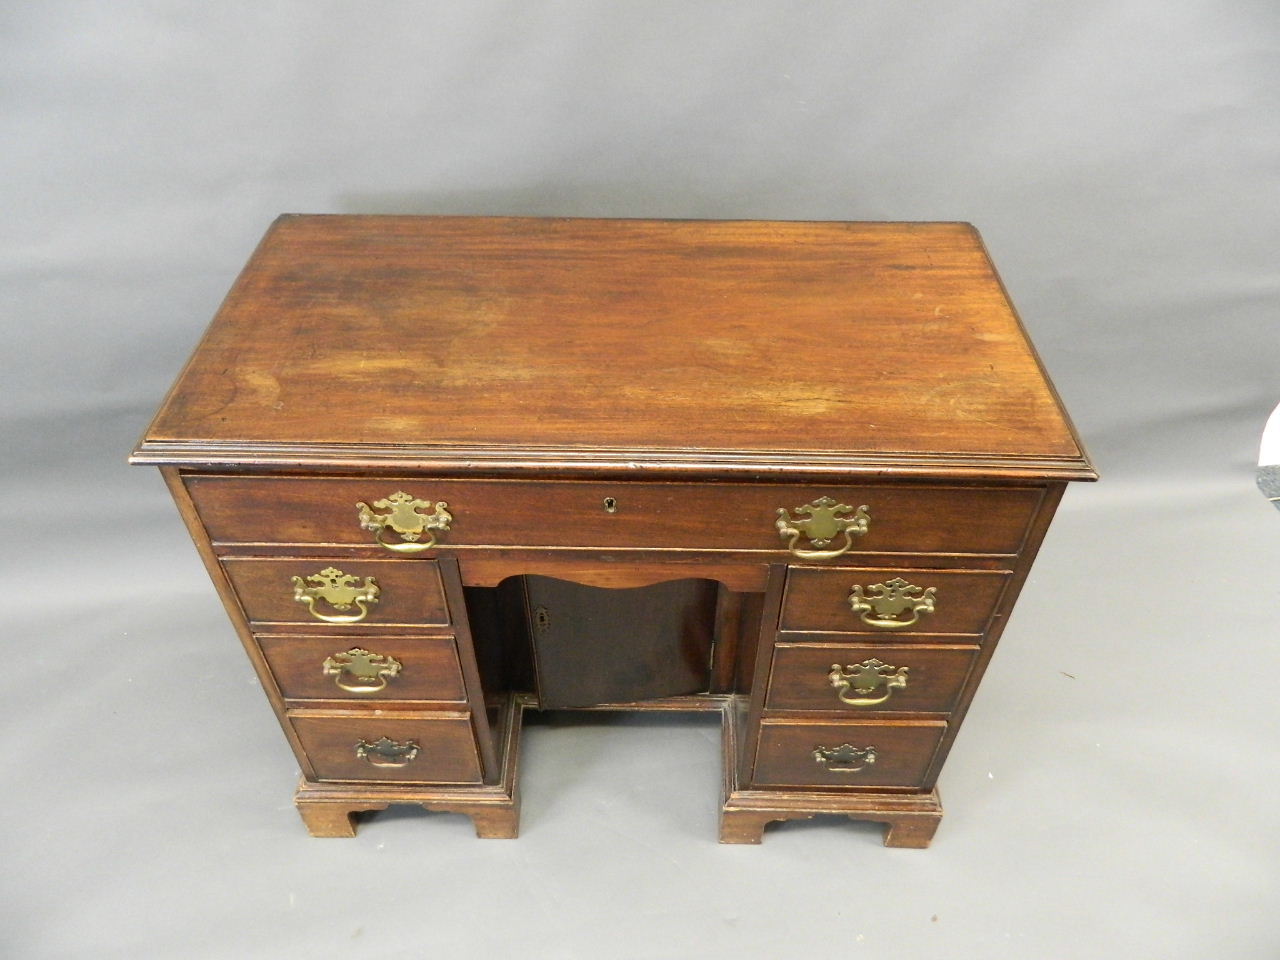 A Georgian mahogany seven drawer kneehole desk with central pigeonhole cupboard and cock beaded - Image 2 of 2